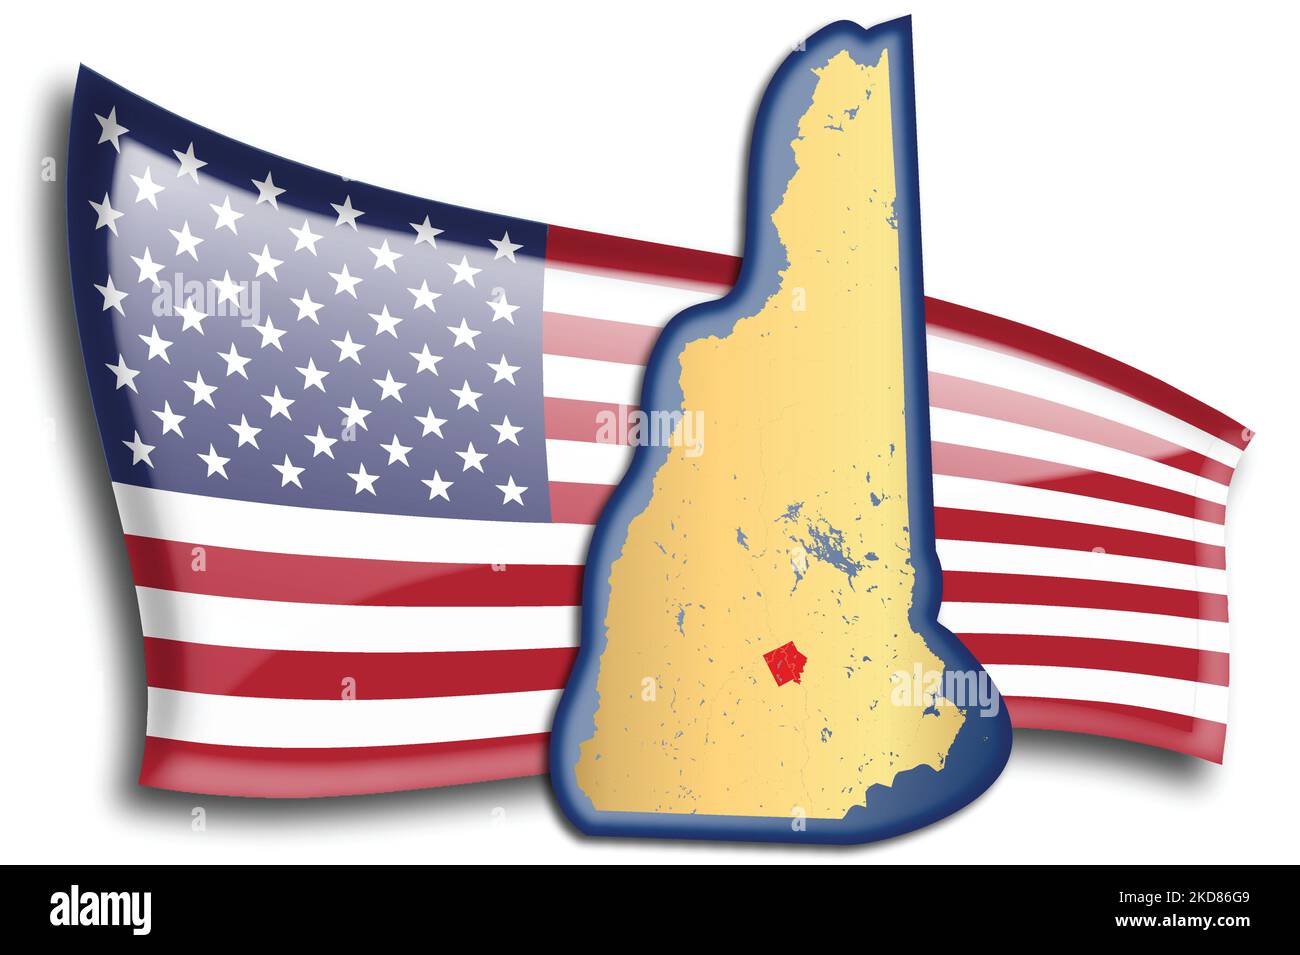 U.S. states - map of New Hampshire against an American flag. Rivers and lakes are shown on the map. American Flag and State Map can be used separately Stock Vector